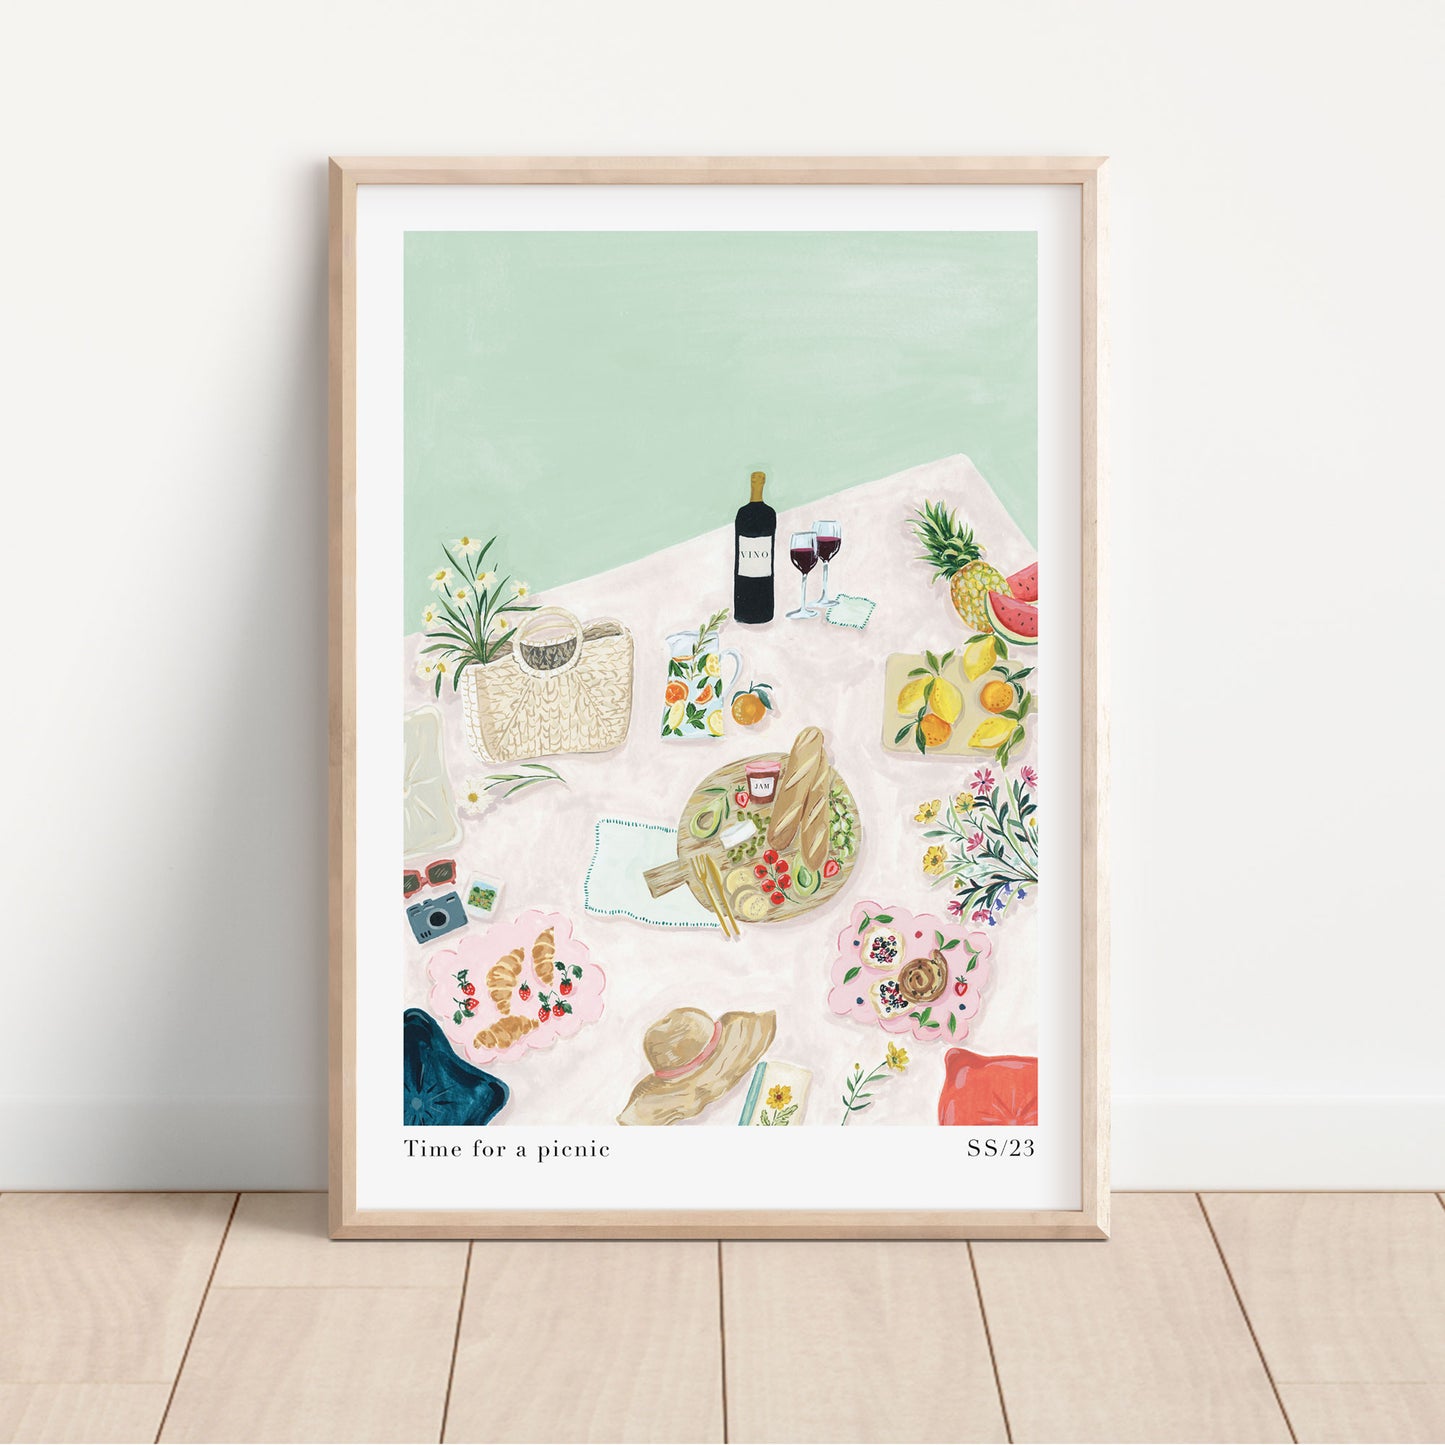 time for a picnic art print - picnic still life hand painted art print 